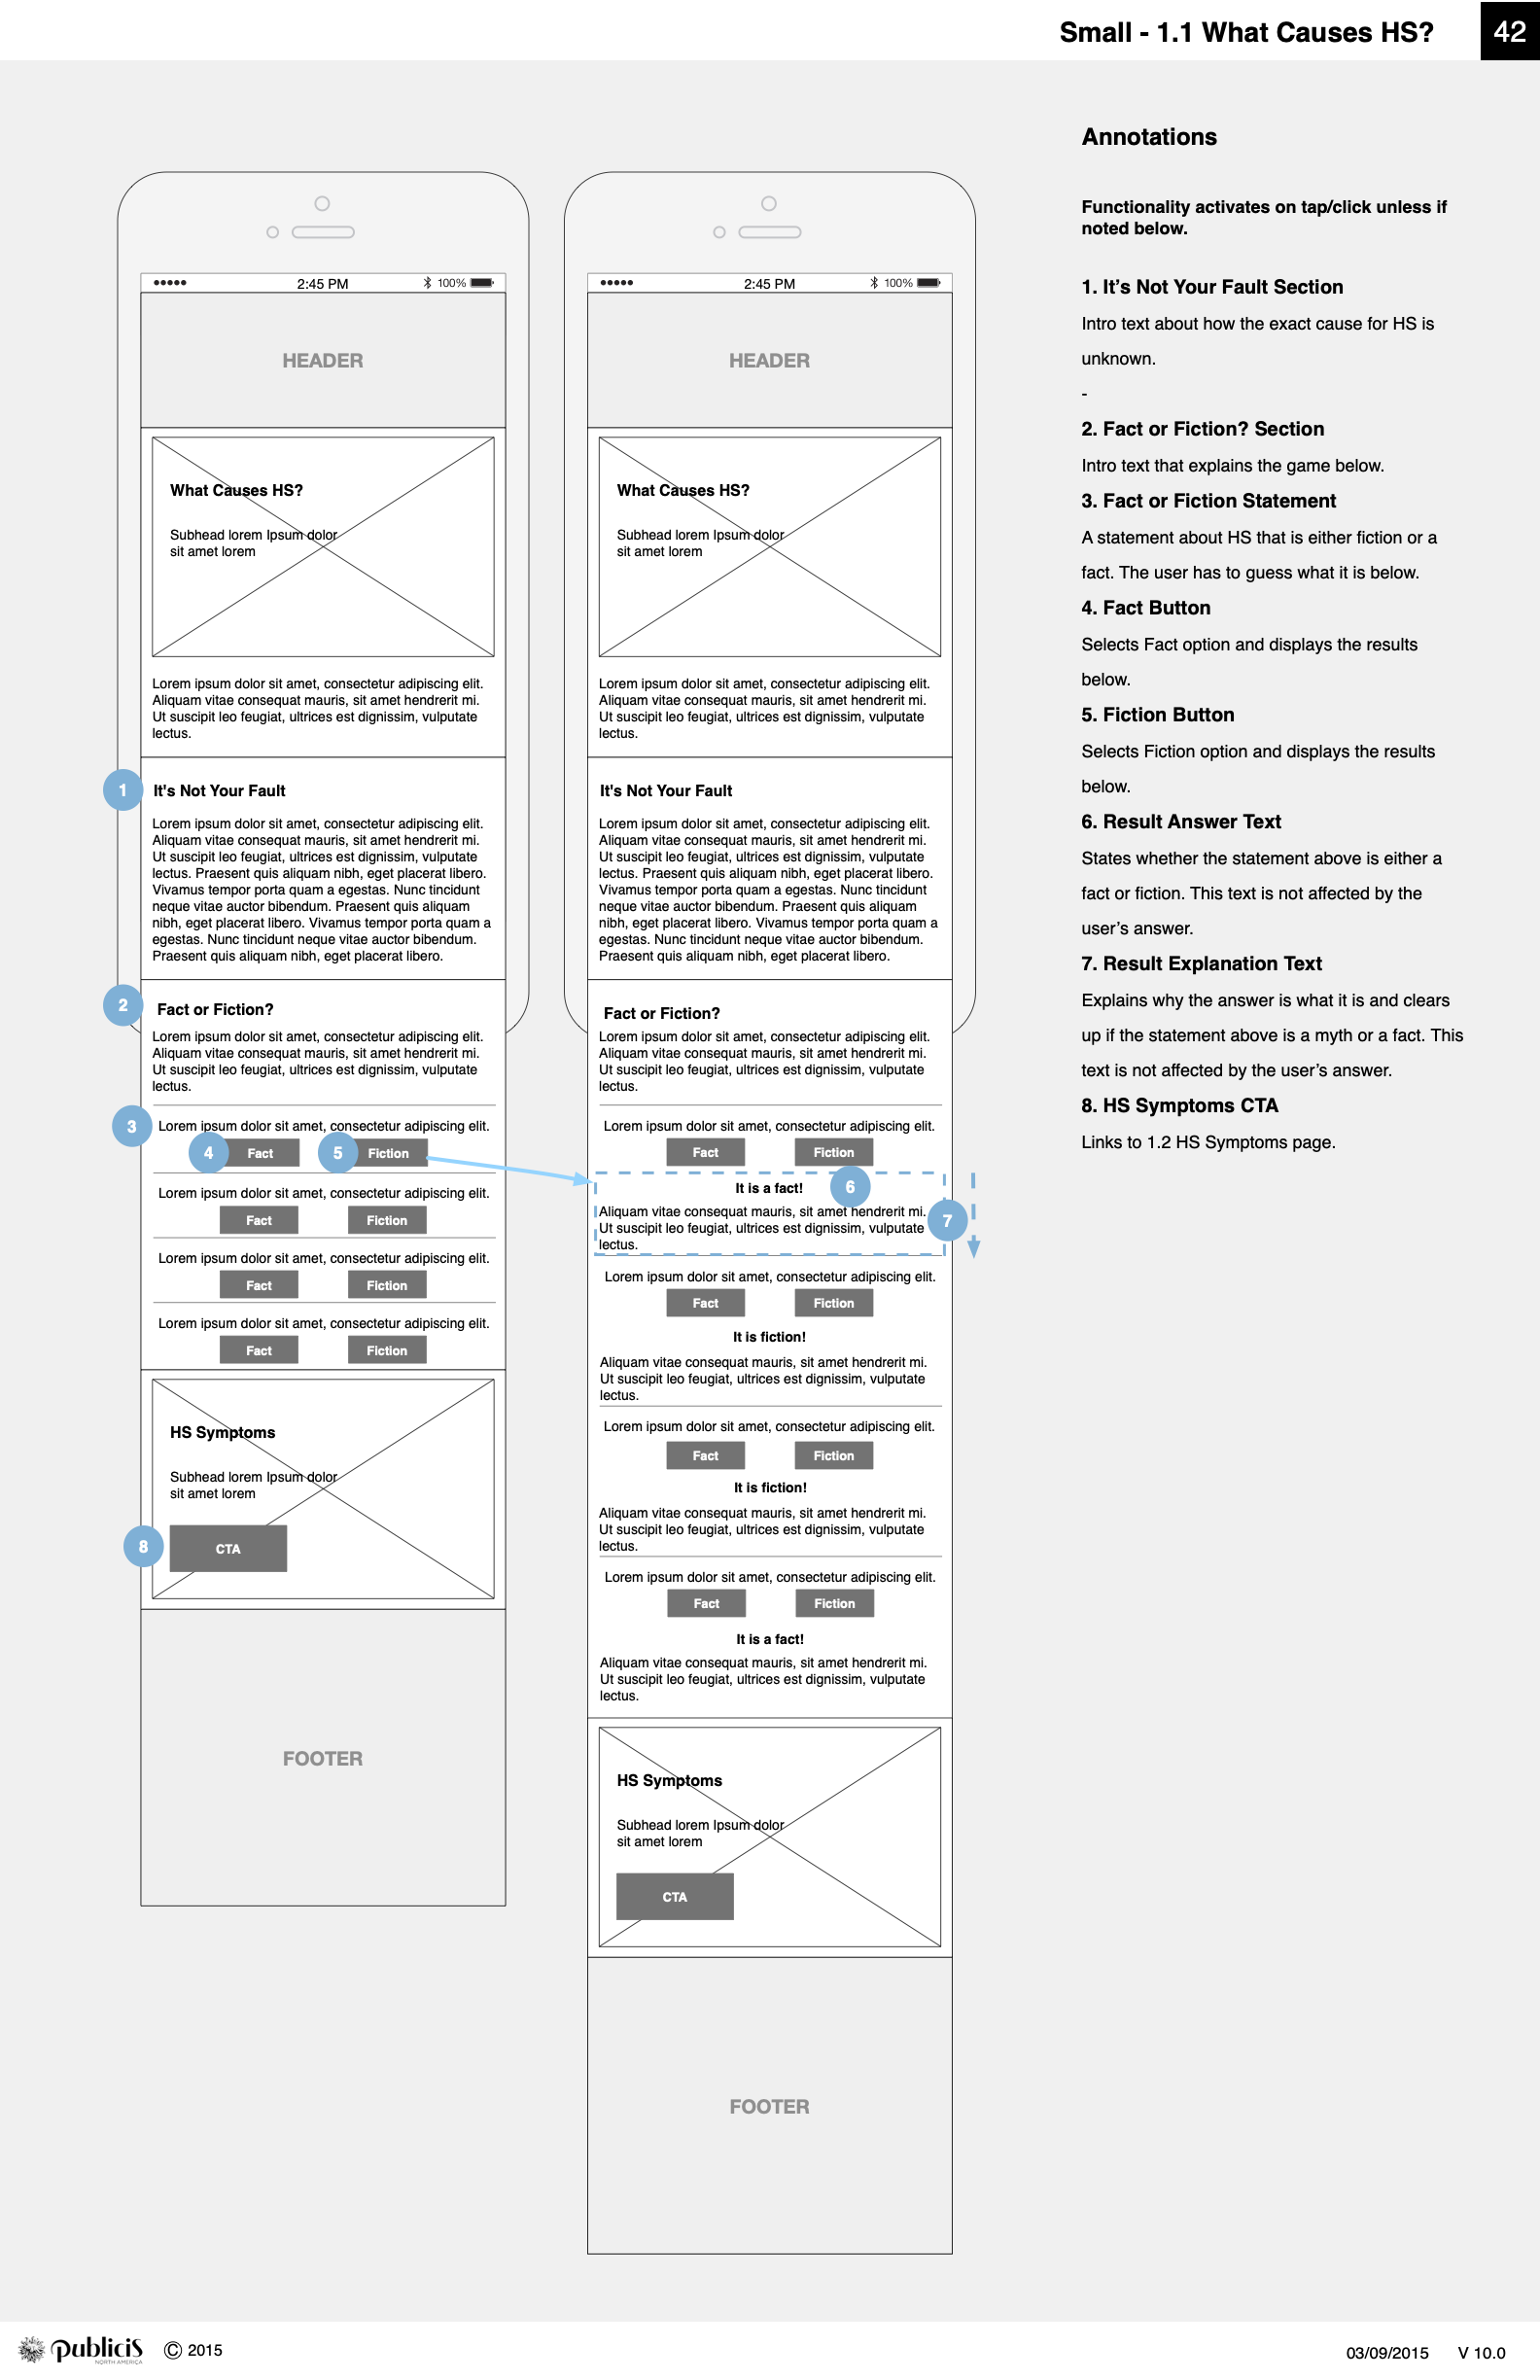 Mobile Wireframe